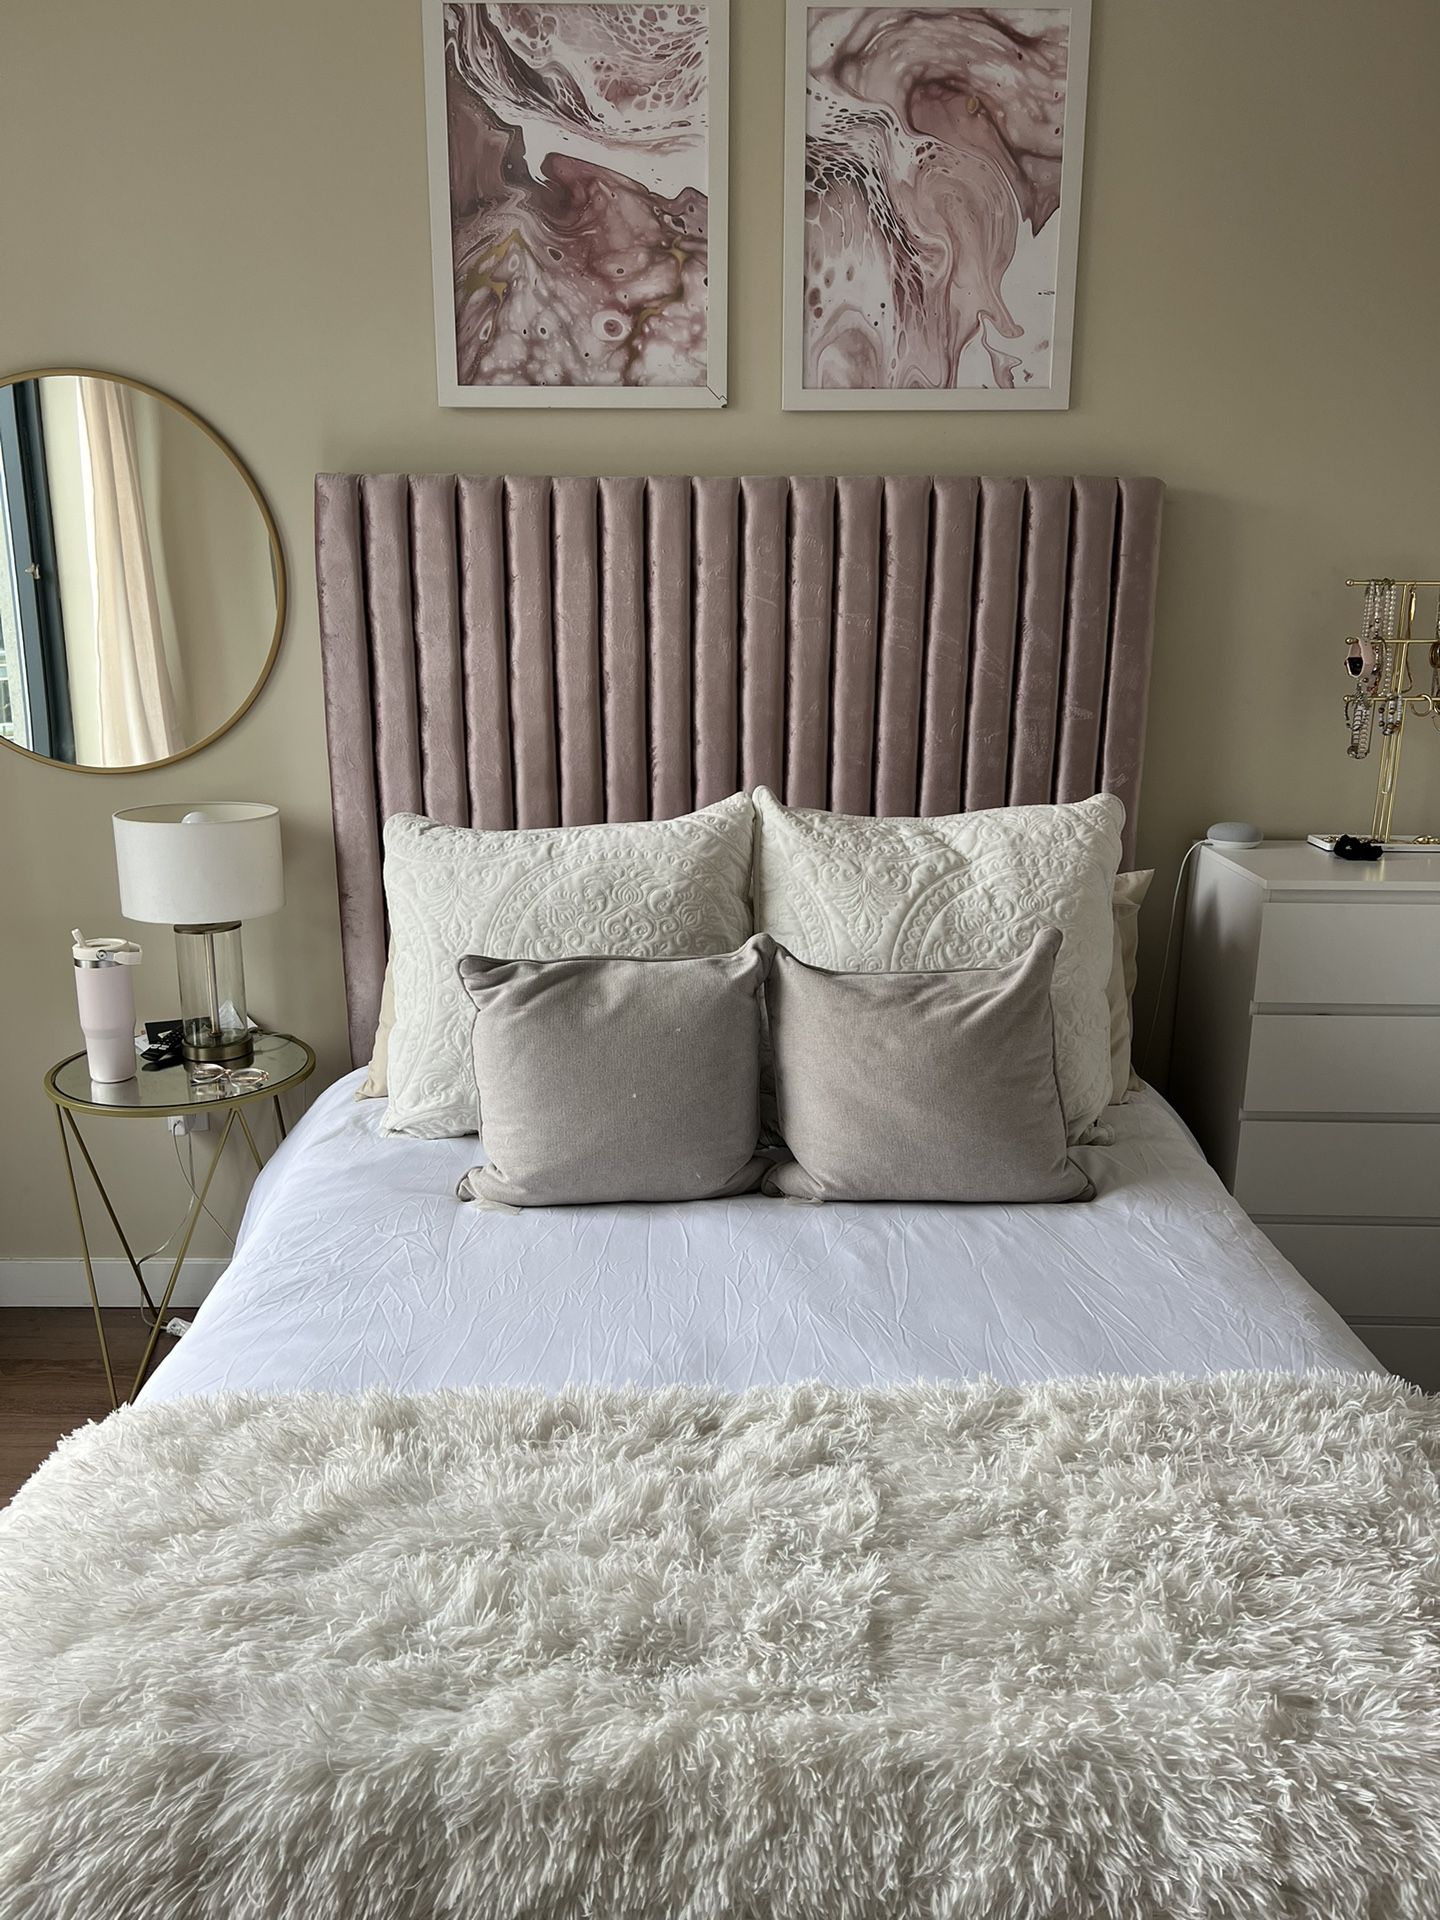 Full Sized Bed With Tall Mauve Headboard